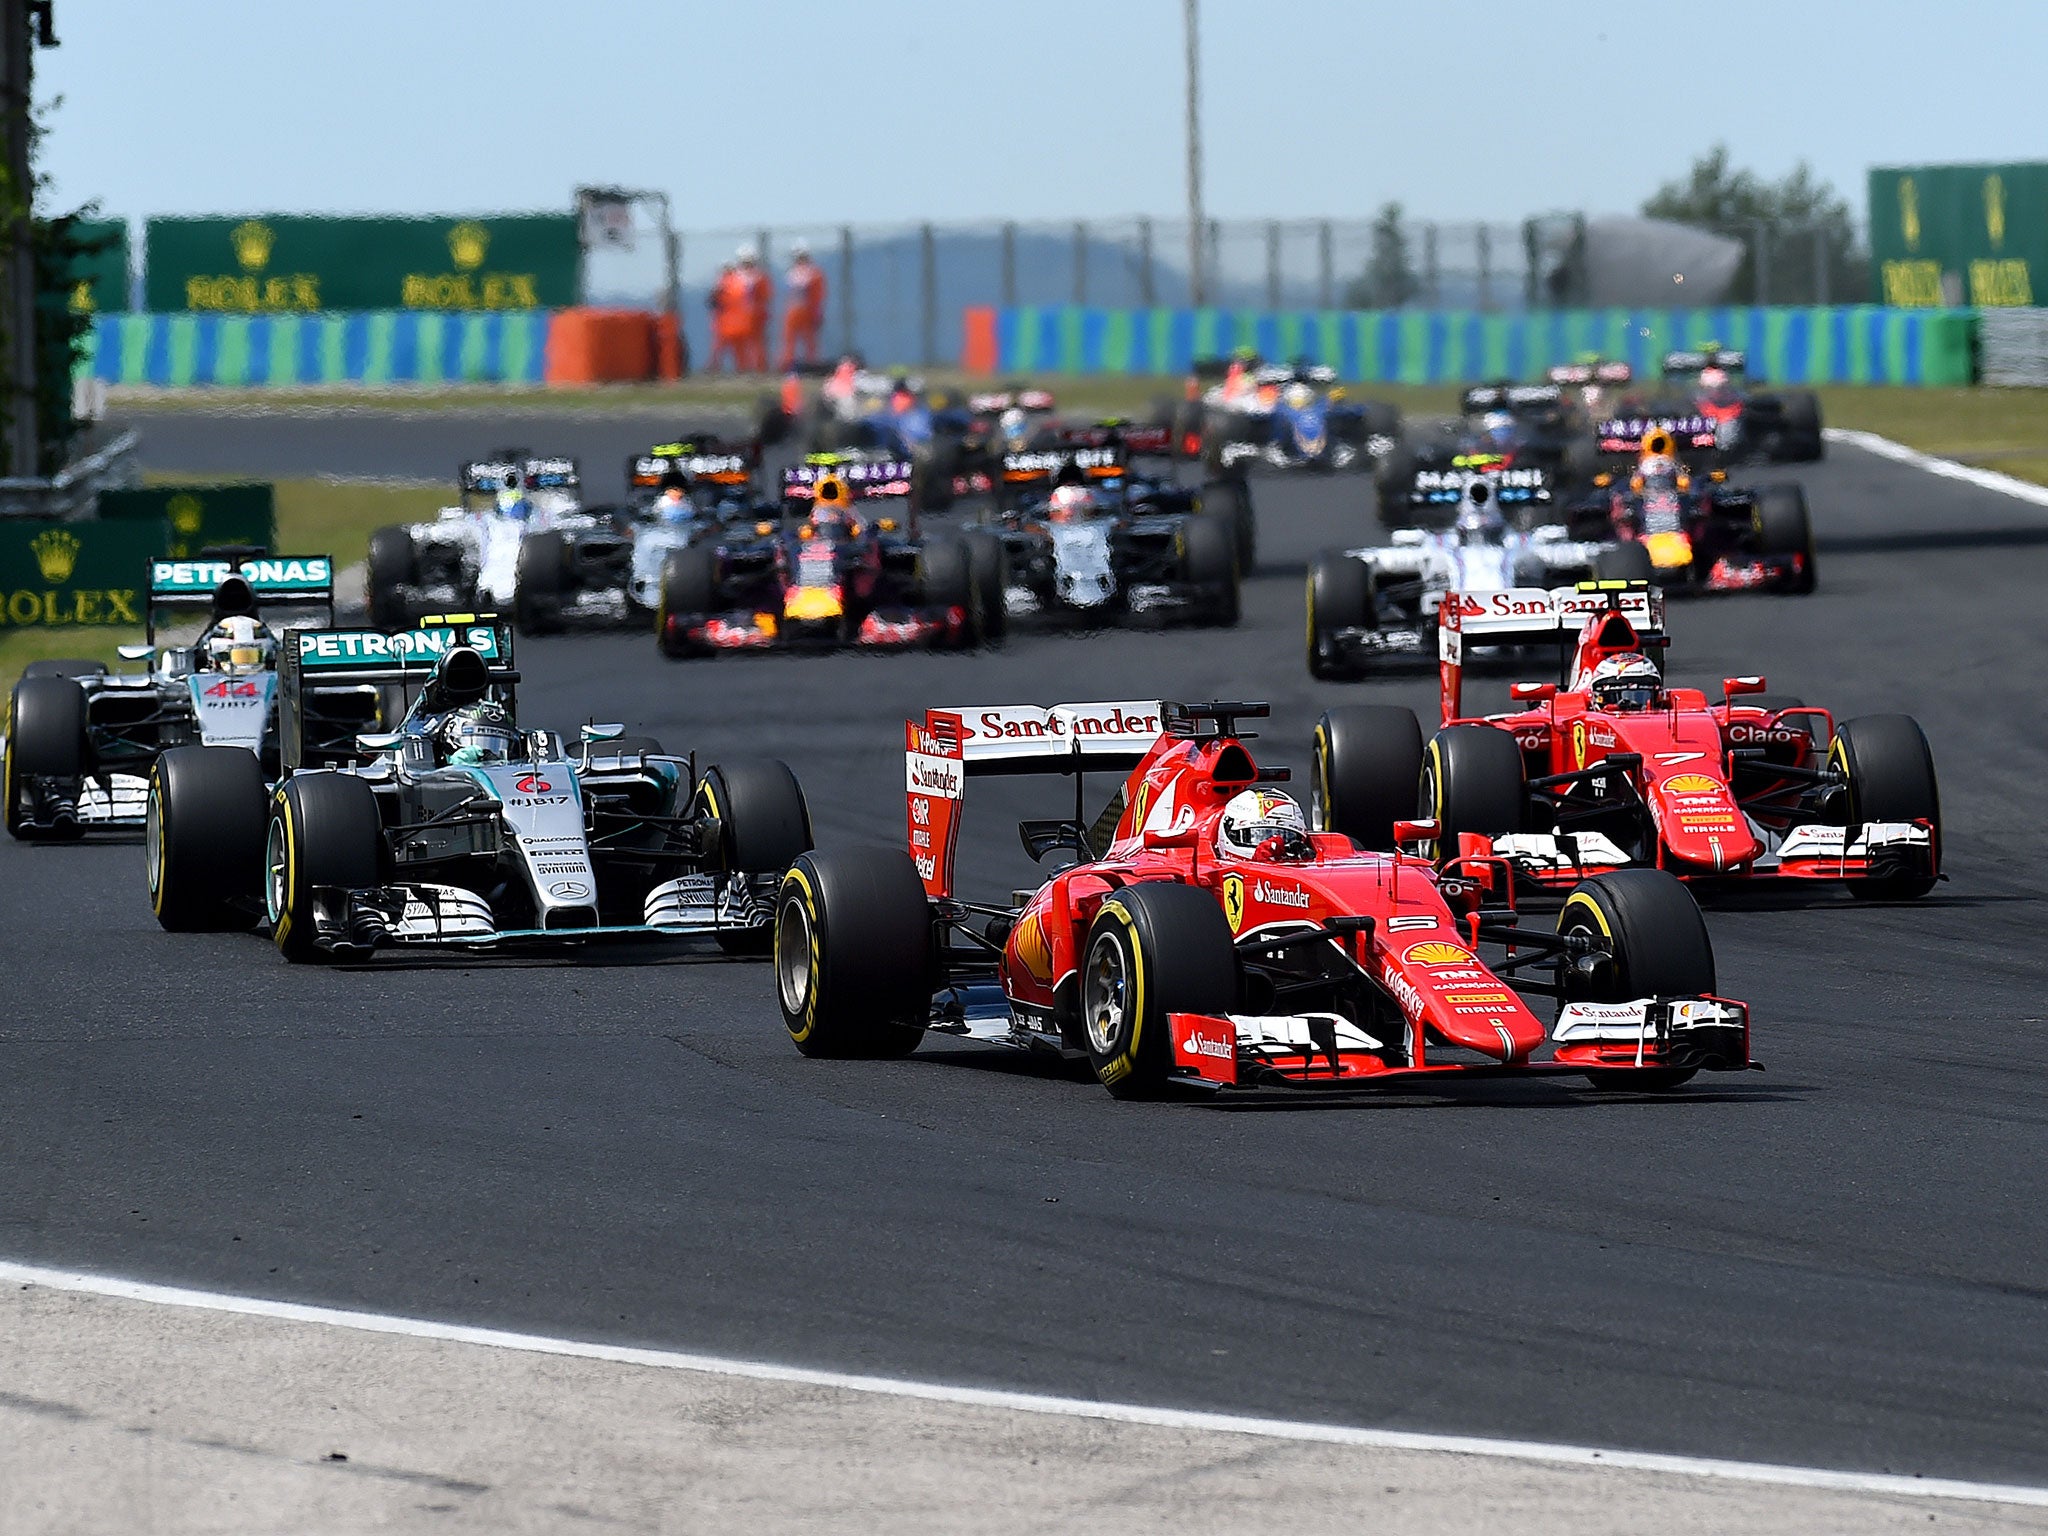 Sebastian Vettel of Germany and Ferrari leads Nico Rosberg of Germany and Mercedes GP, Lewis Hamilton of Great Britain and Mercedes GP and Kimi Raikkonen of Finland and Ferrari into the second corner